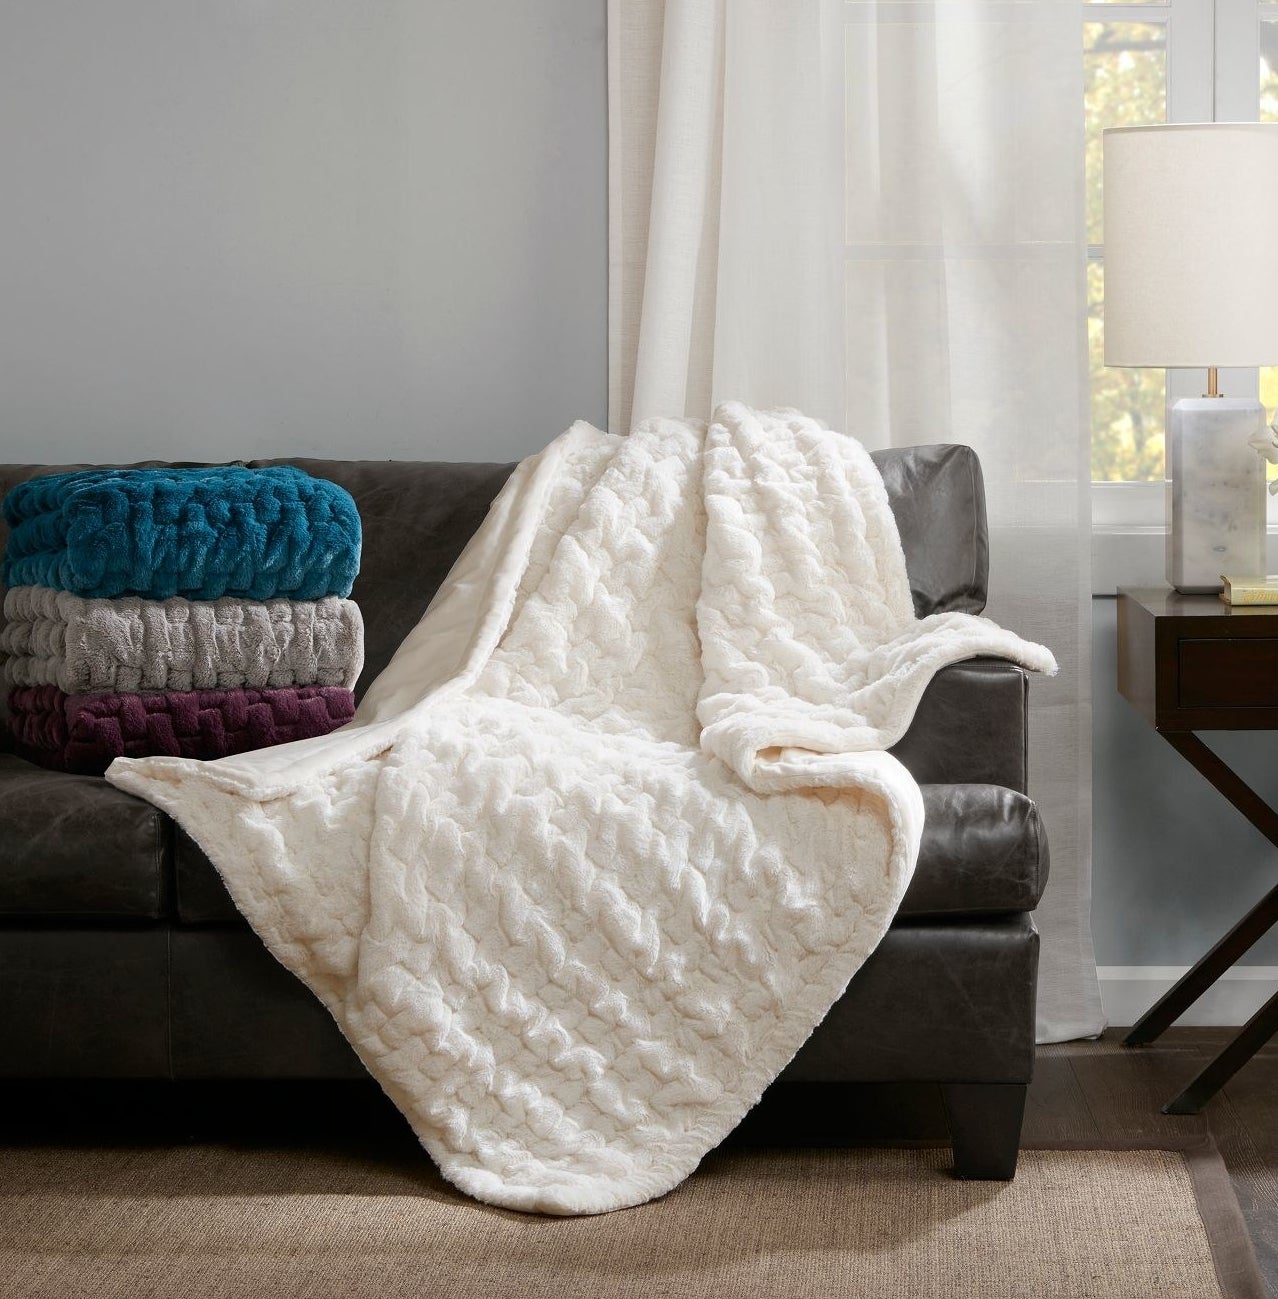 A white throw blanket spread over a couch